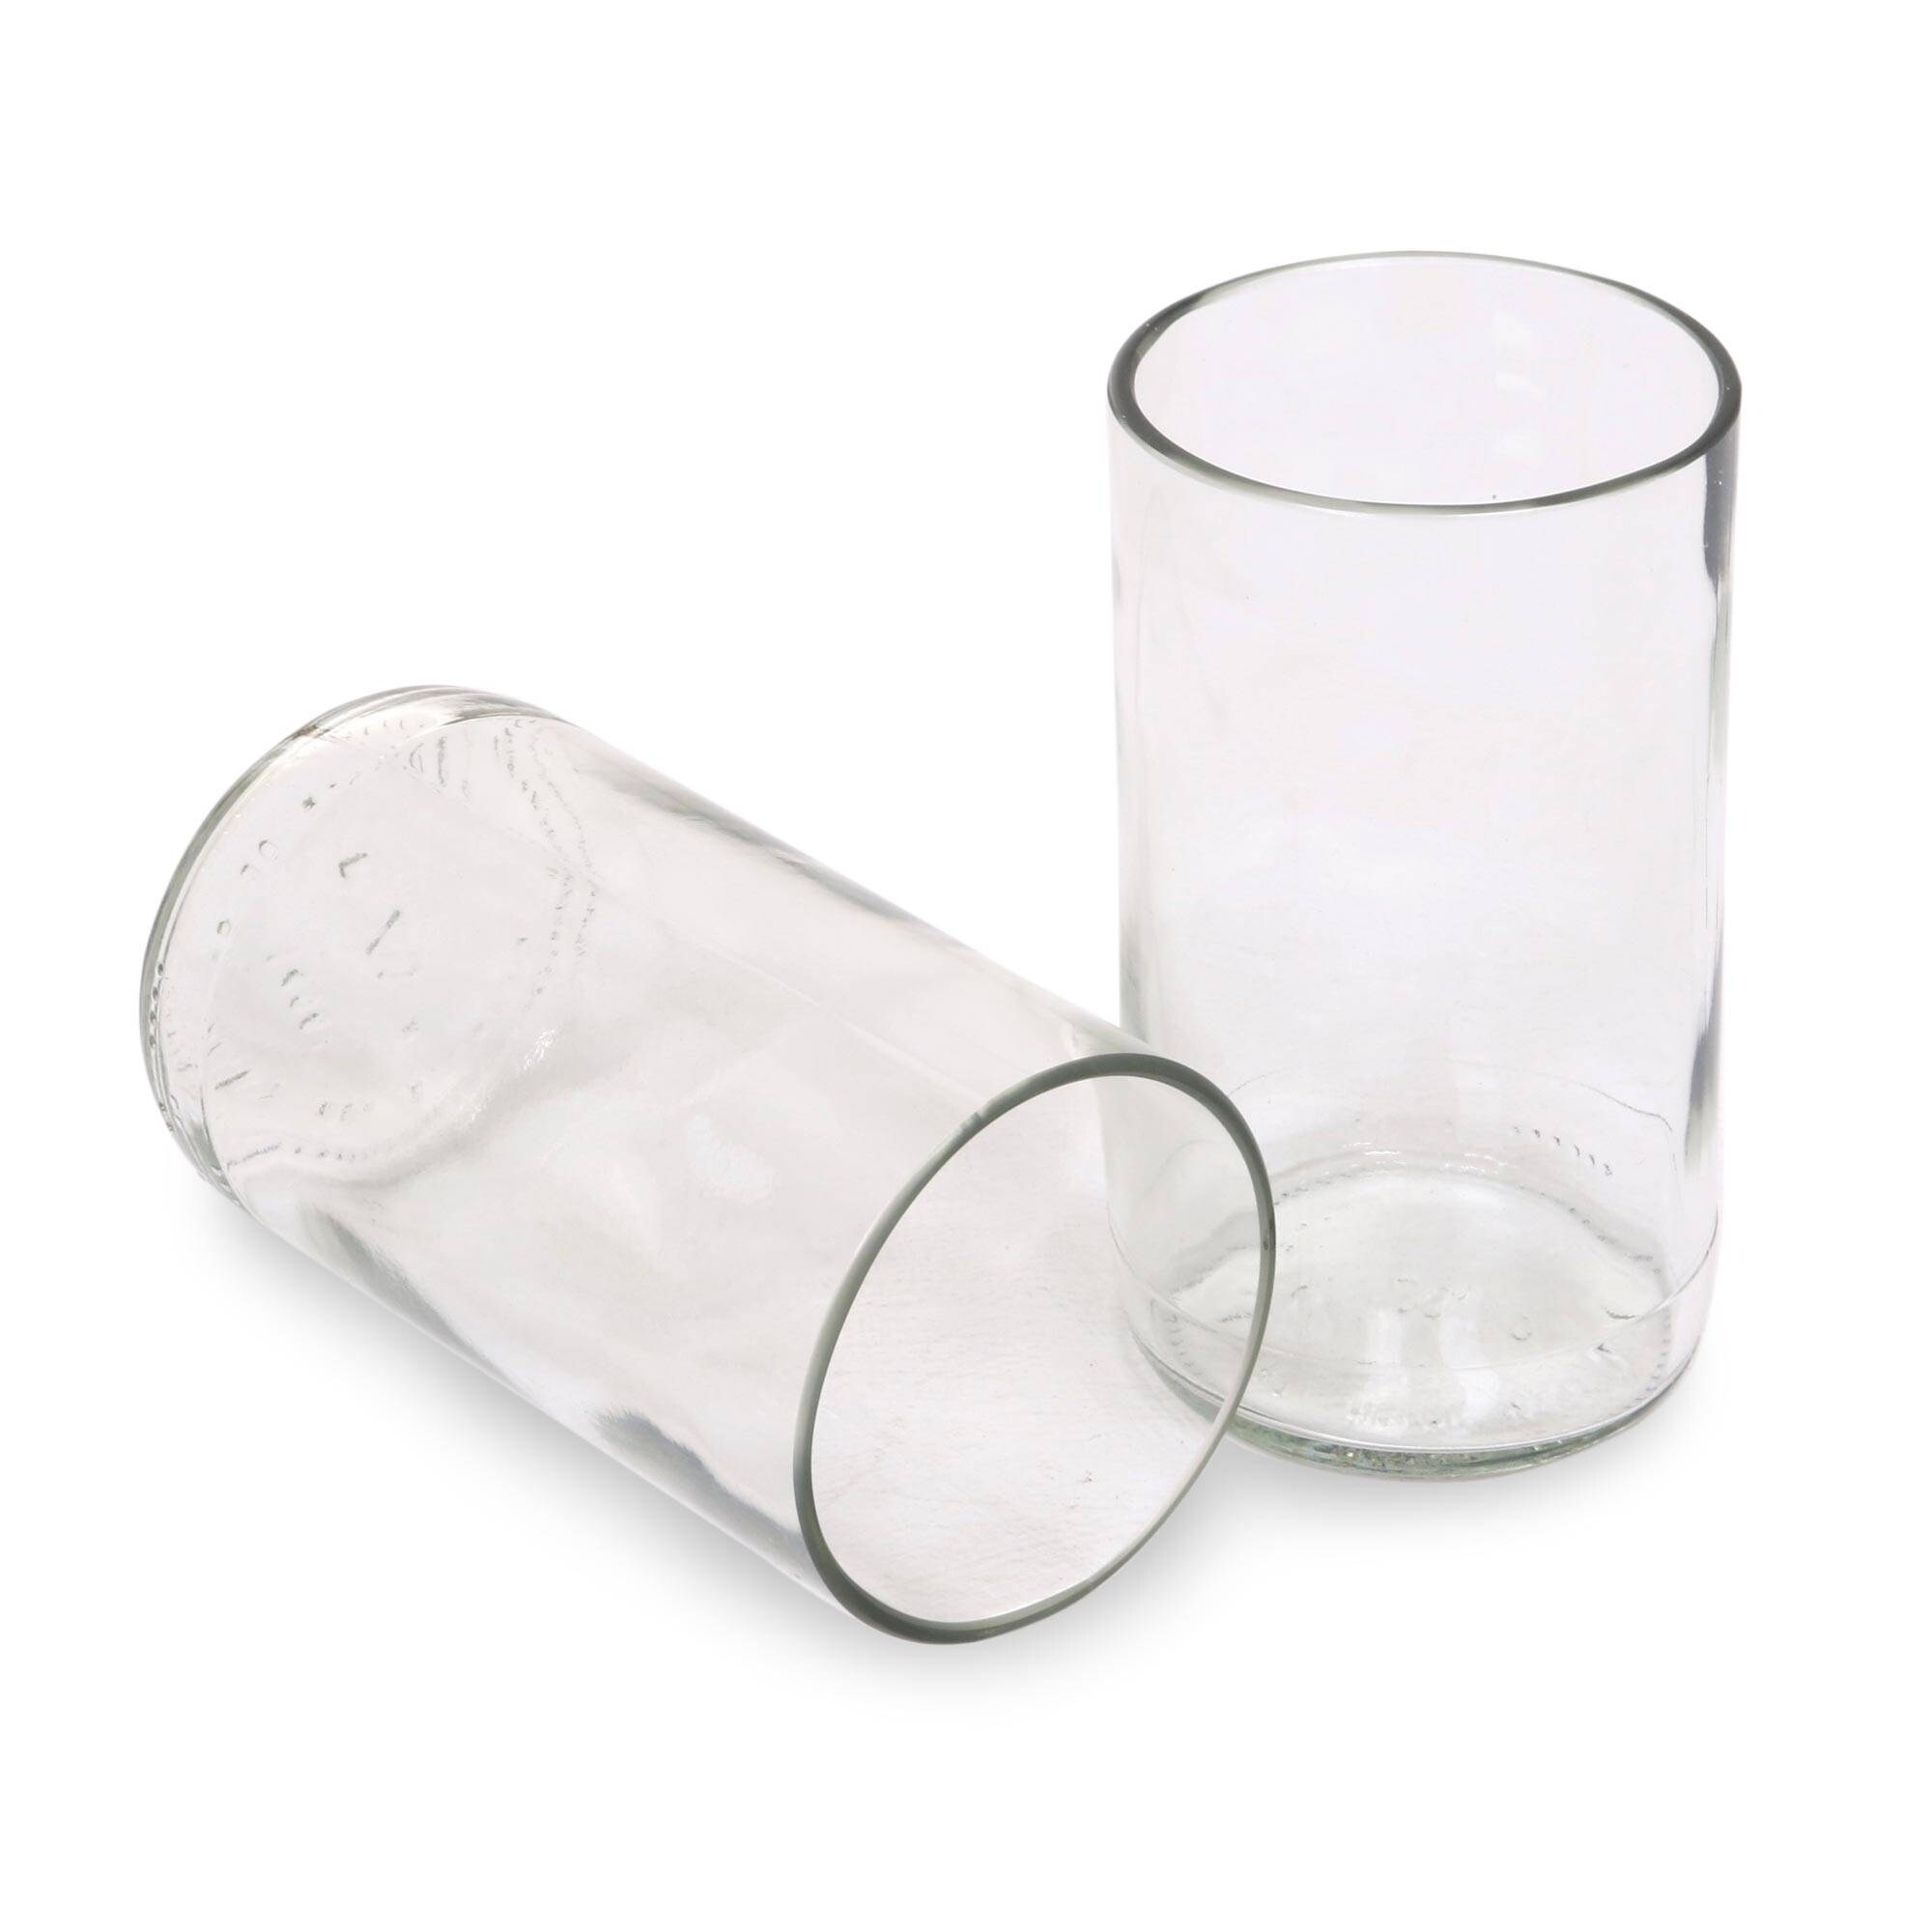 Artisan Crafted Recycled Clear Drinking Glasses (Pair) - Clear Sky